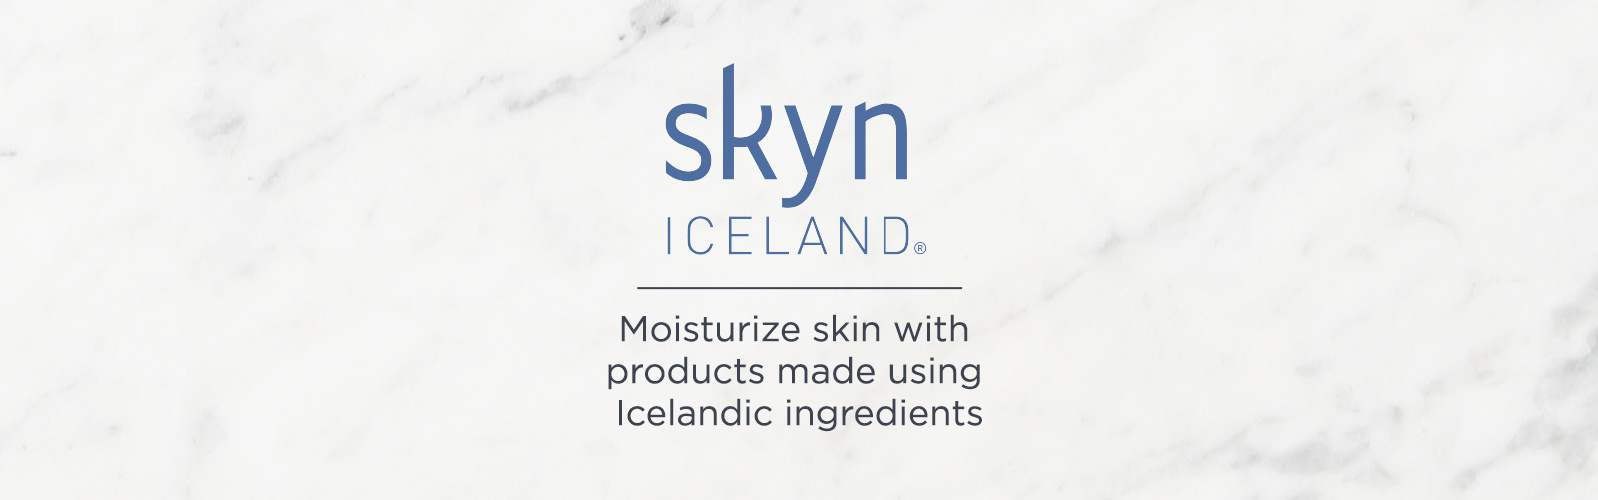 skyn ICELAND. Moisturize skin with products made using Icelandic ingredients